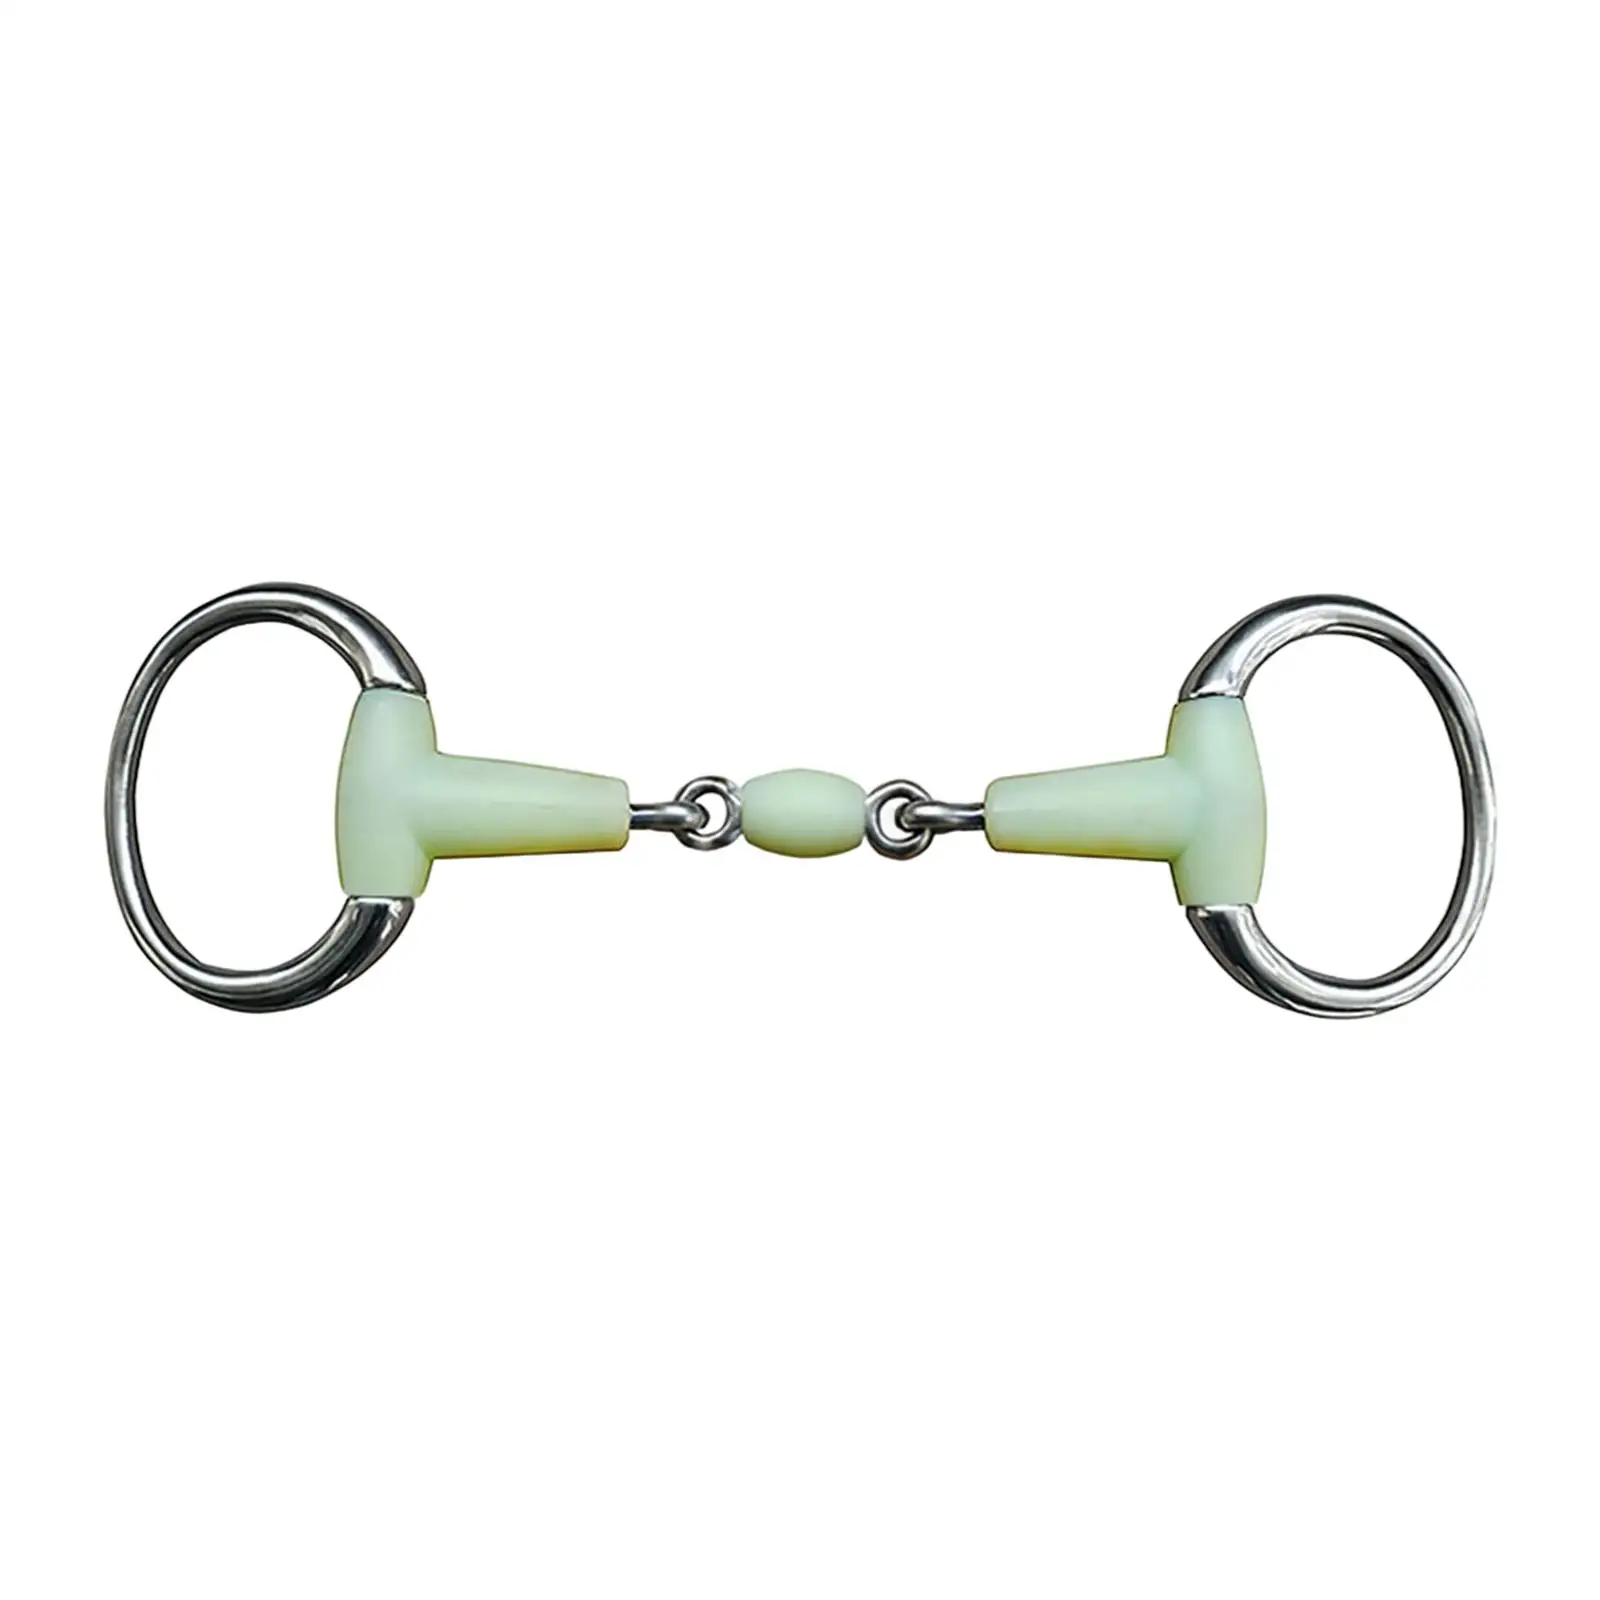 Durable Horse Ring Bit Horse Training Stainless Steel for Horse Riding Equipment Outdoor Sports Supplies